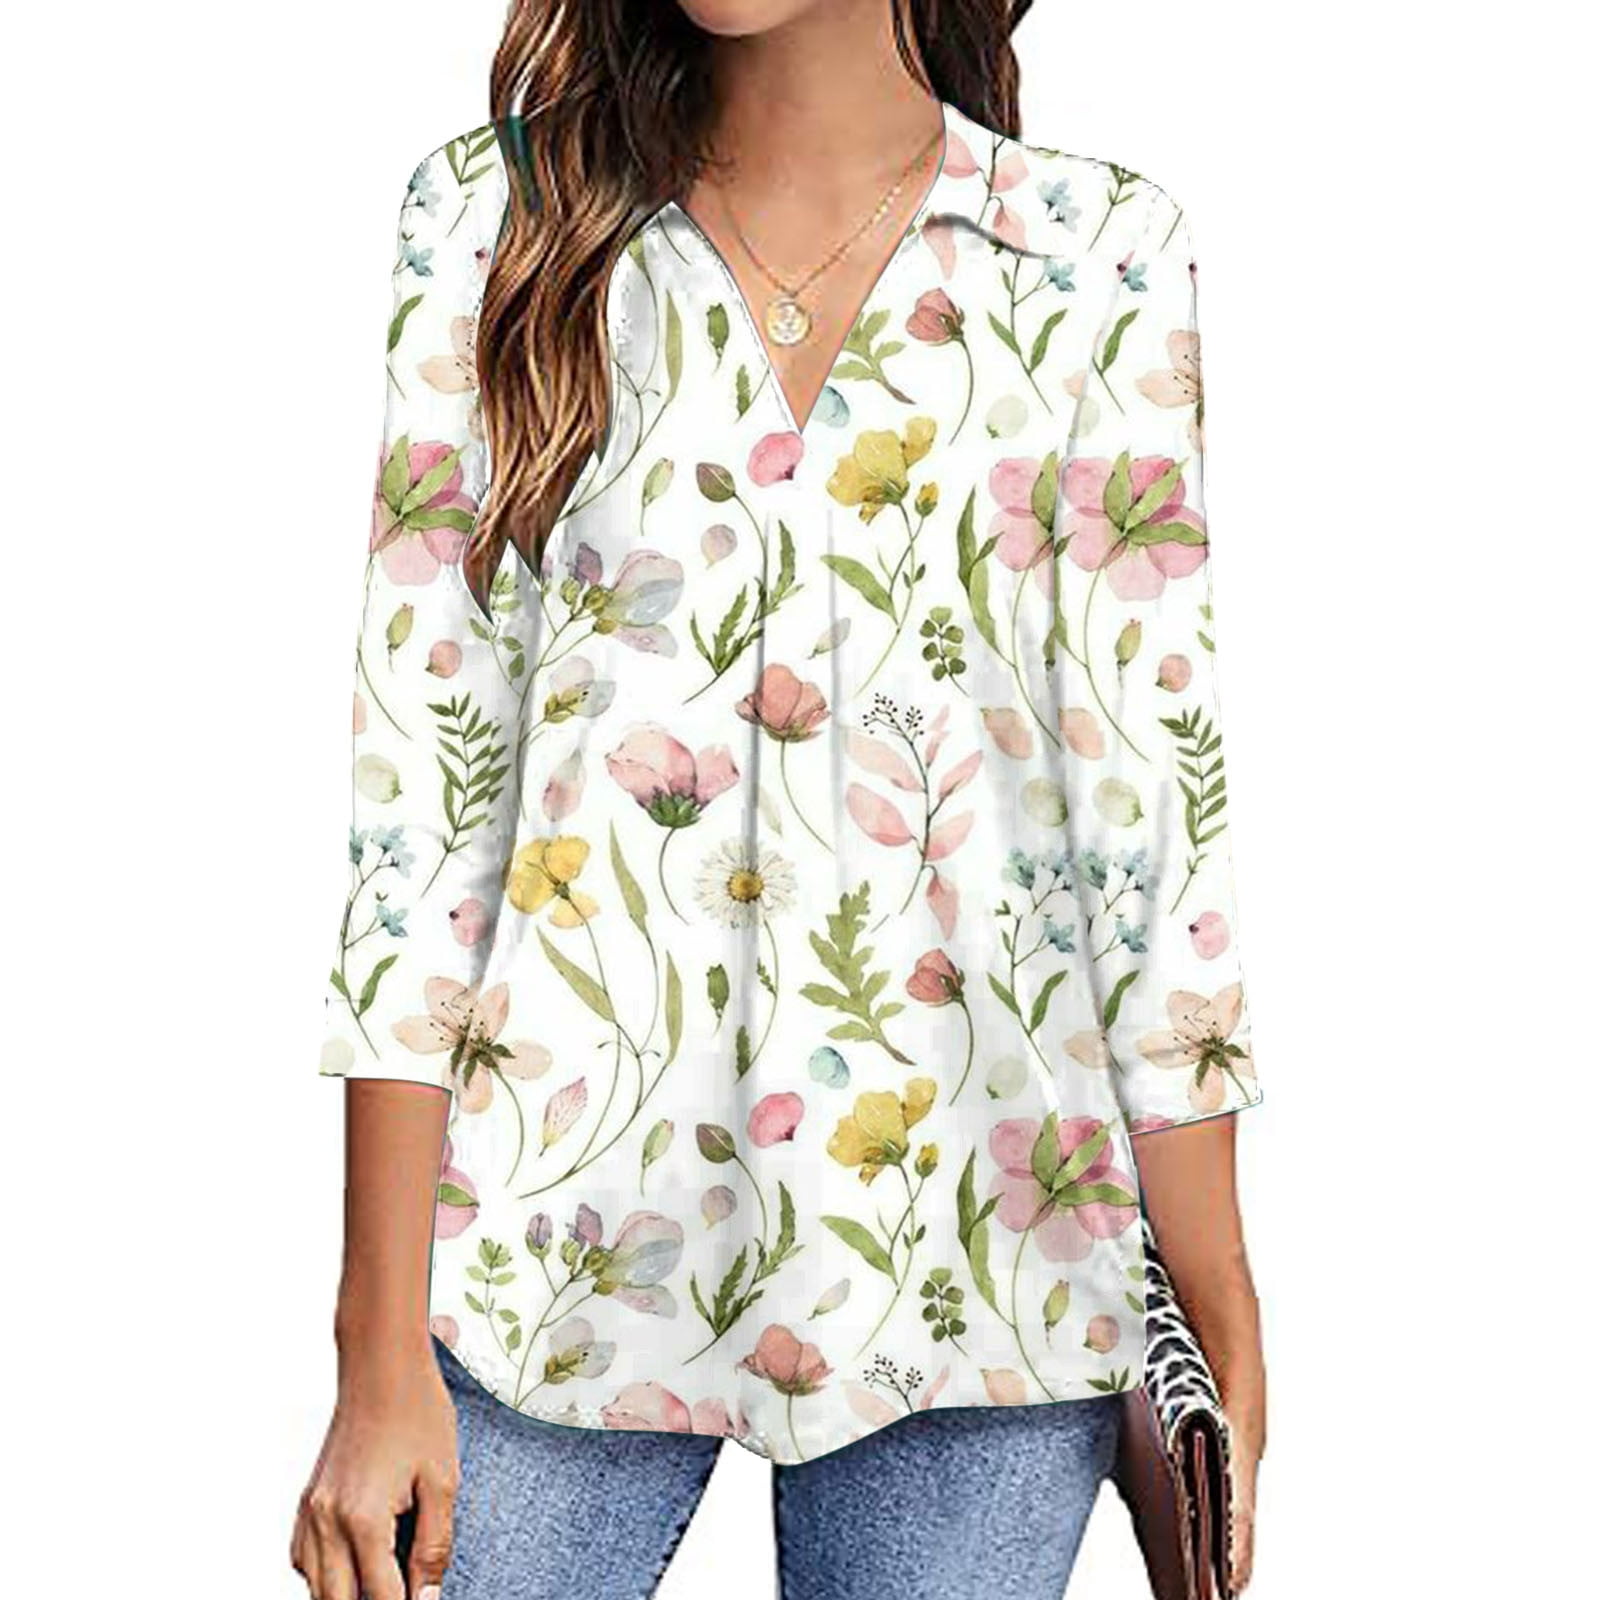 Oalirro Going out Tops for Women Deals Clearance Fashion Woman V Neck ...